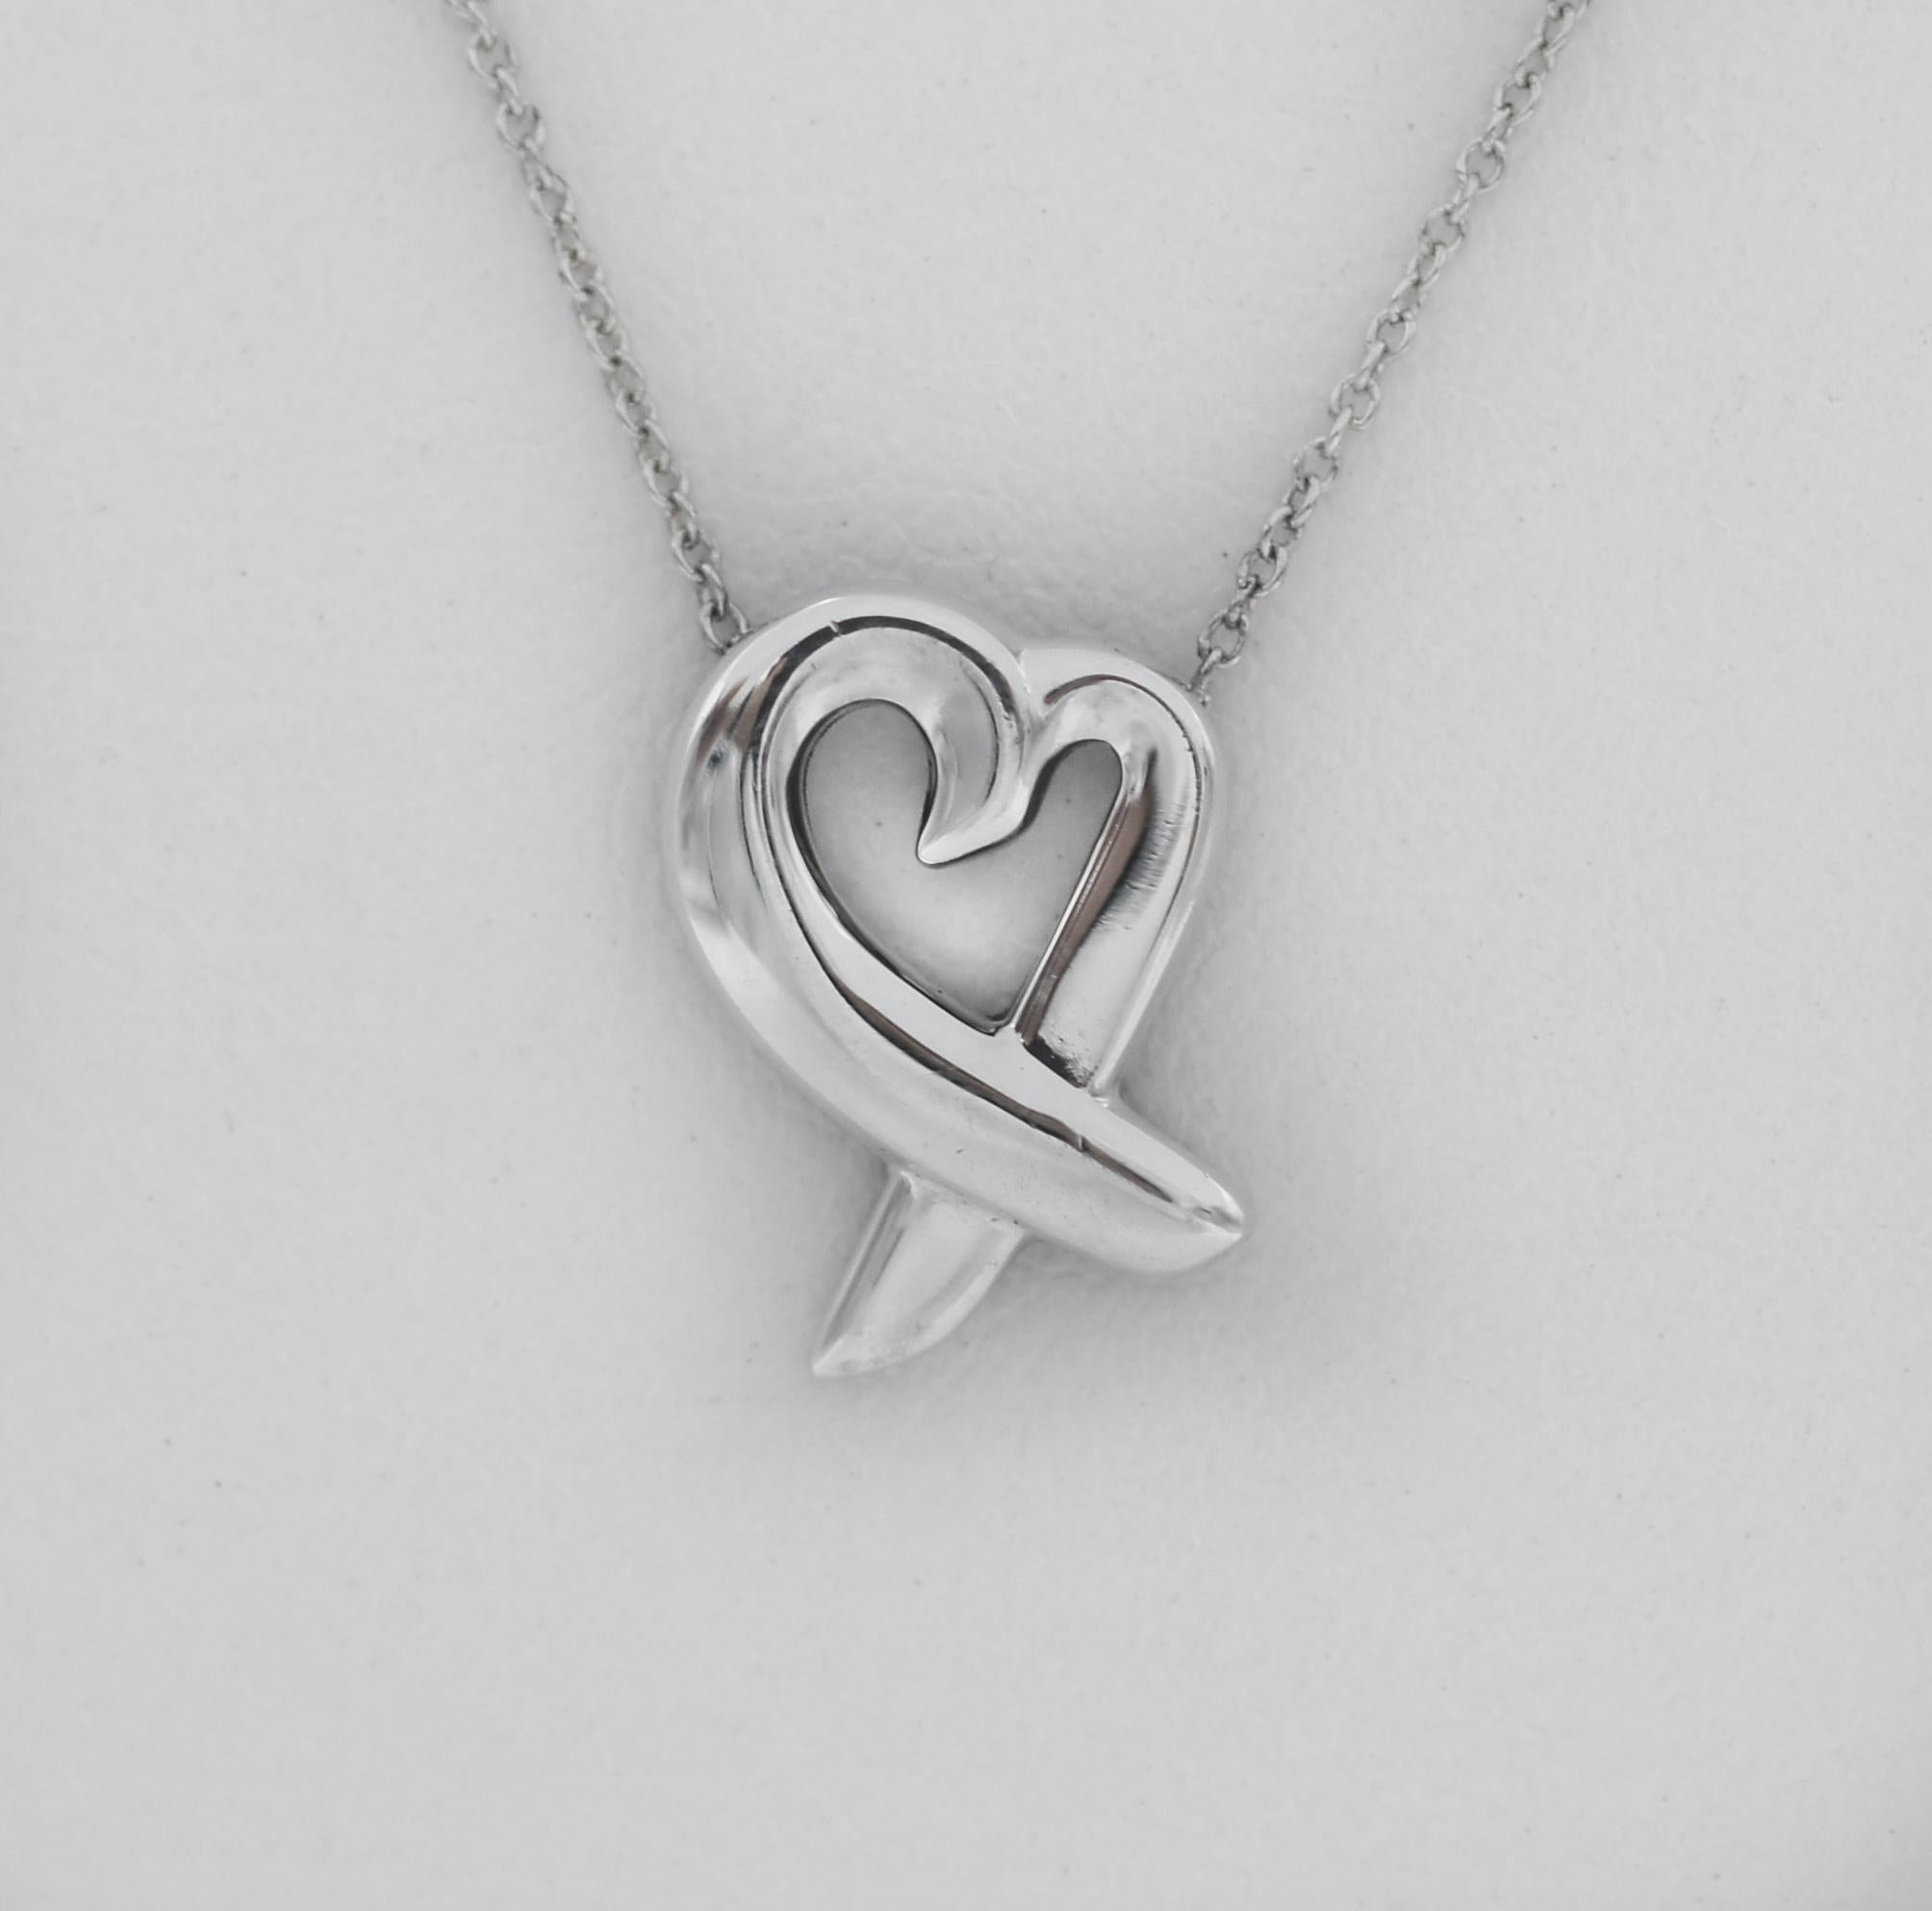 Tiffany & Co
925 Sterling Silver
Loving heart necklace
by Paloma Picasso
16